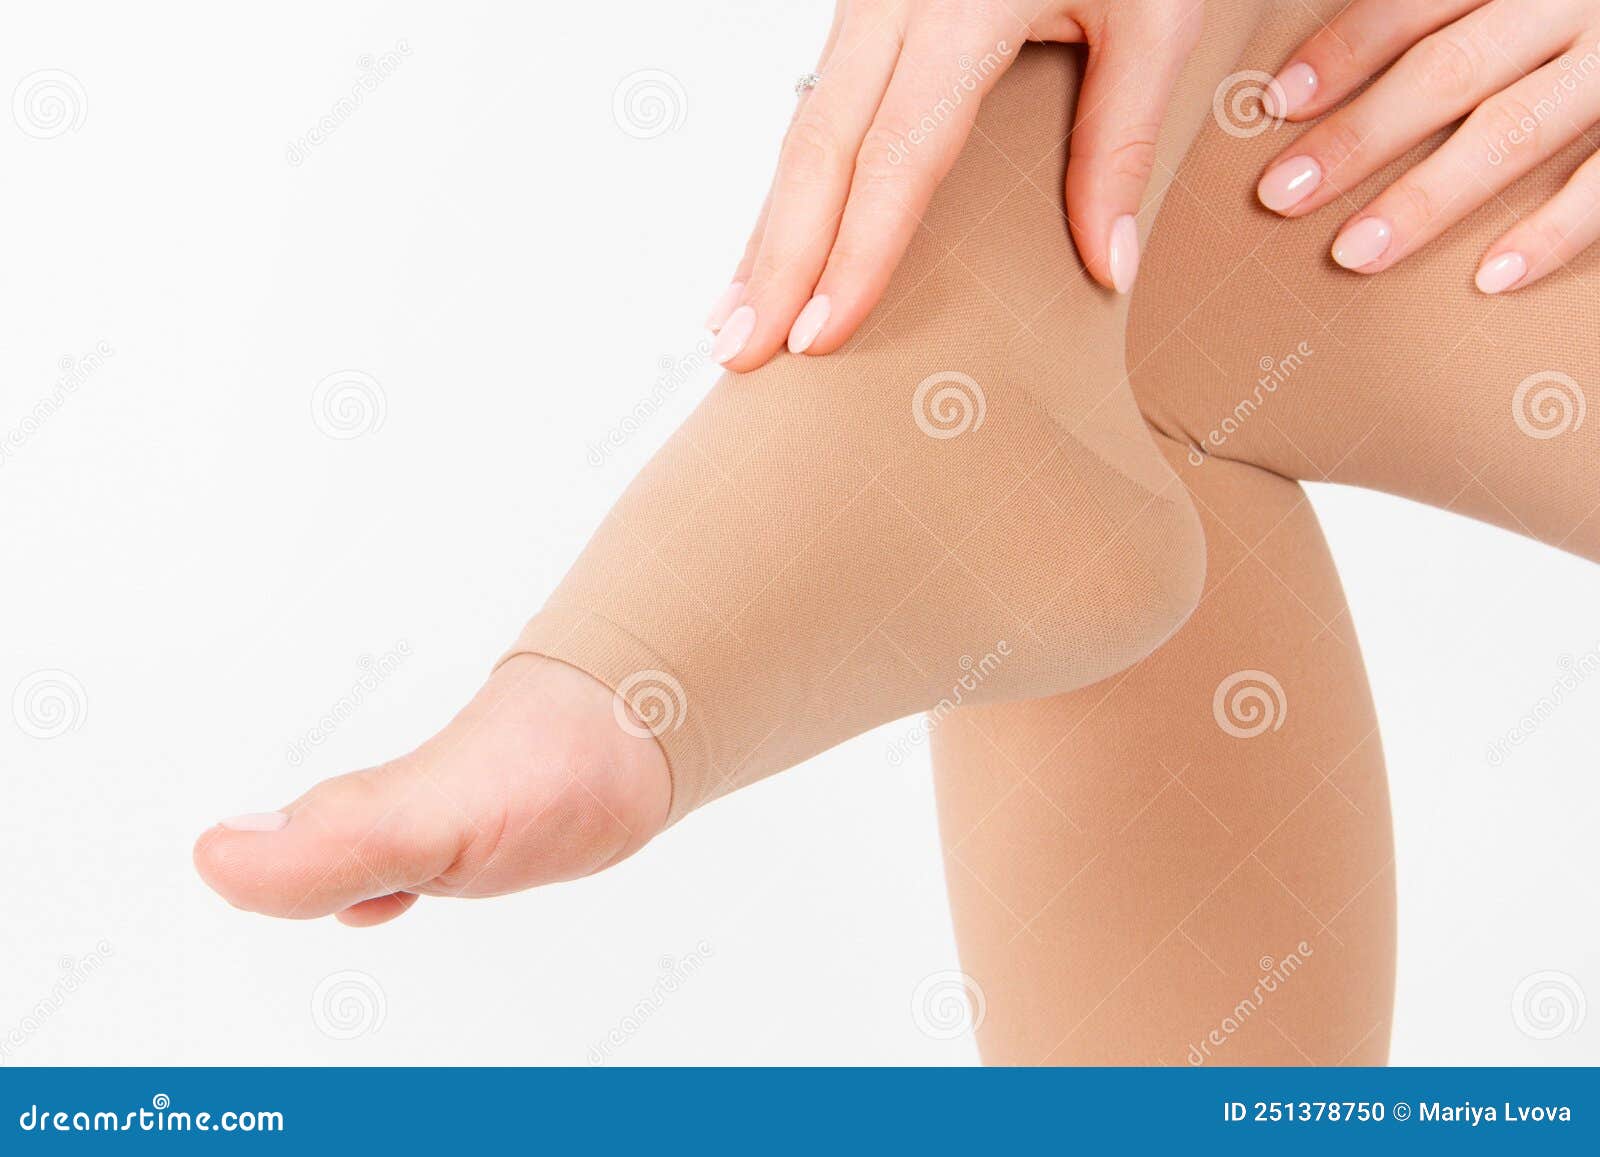 https://thumbs.dreamstime.com/z/compression-hosiery-medical-compression-stockings-tights-varicose-veins-venouse-therapy-socks-man-women-251378750.jpg